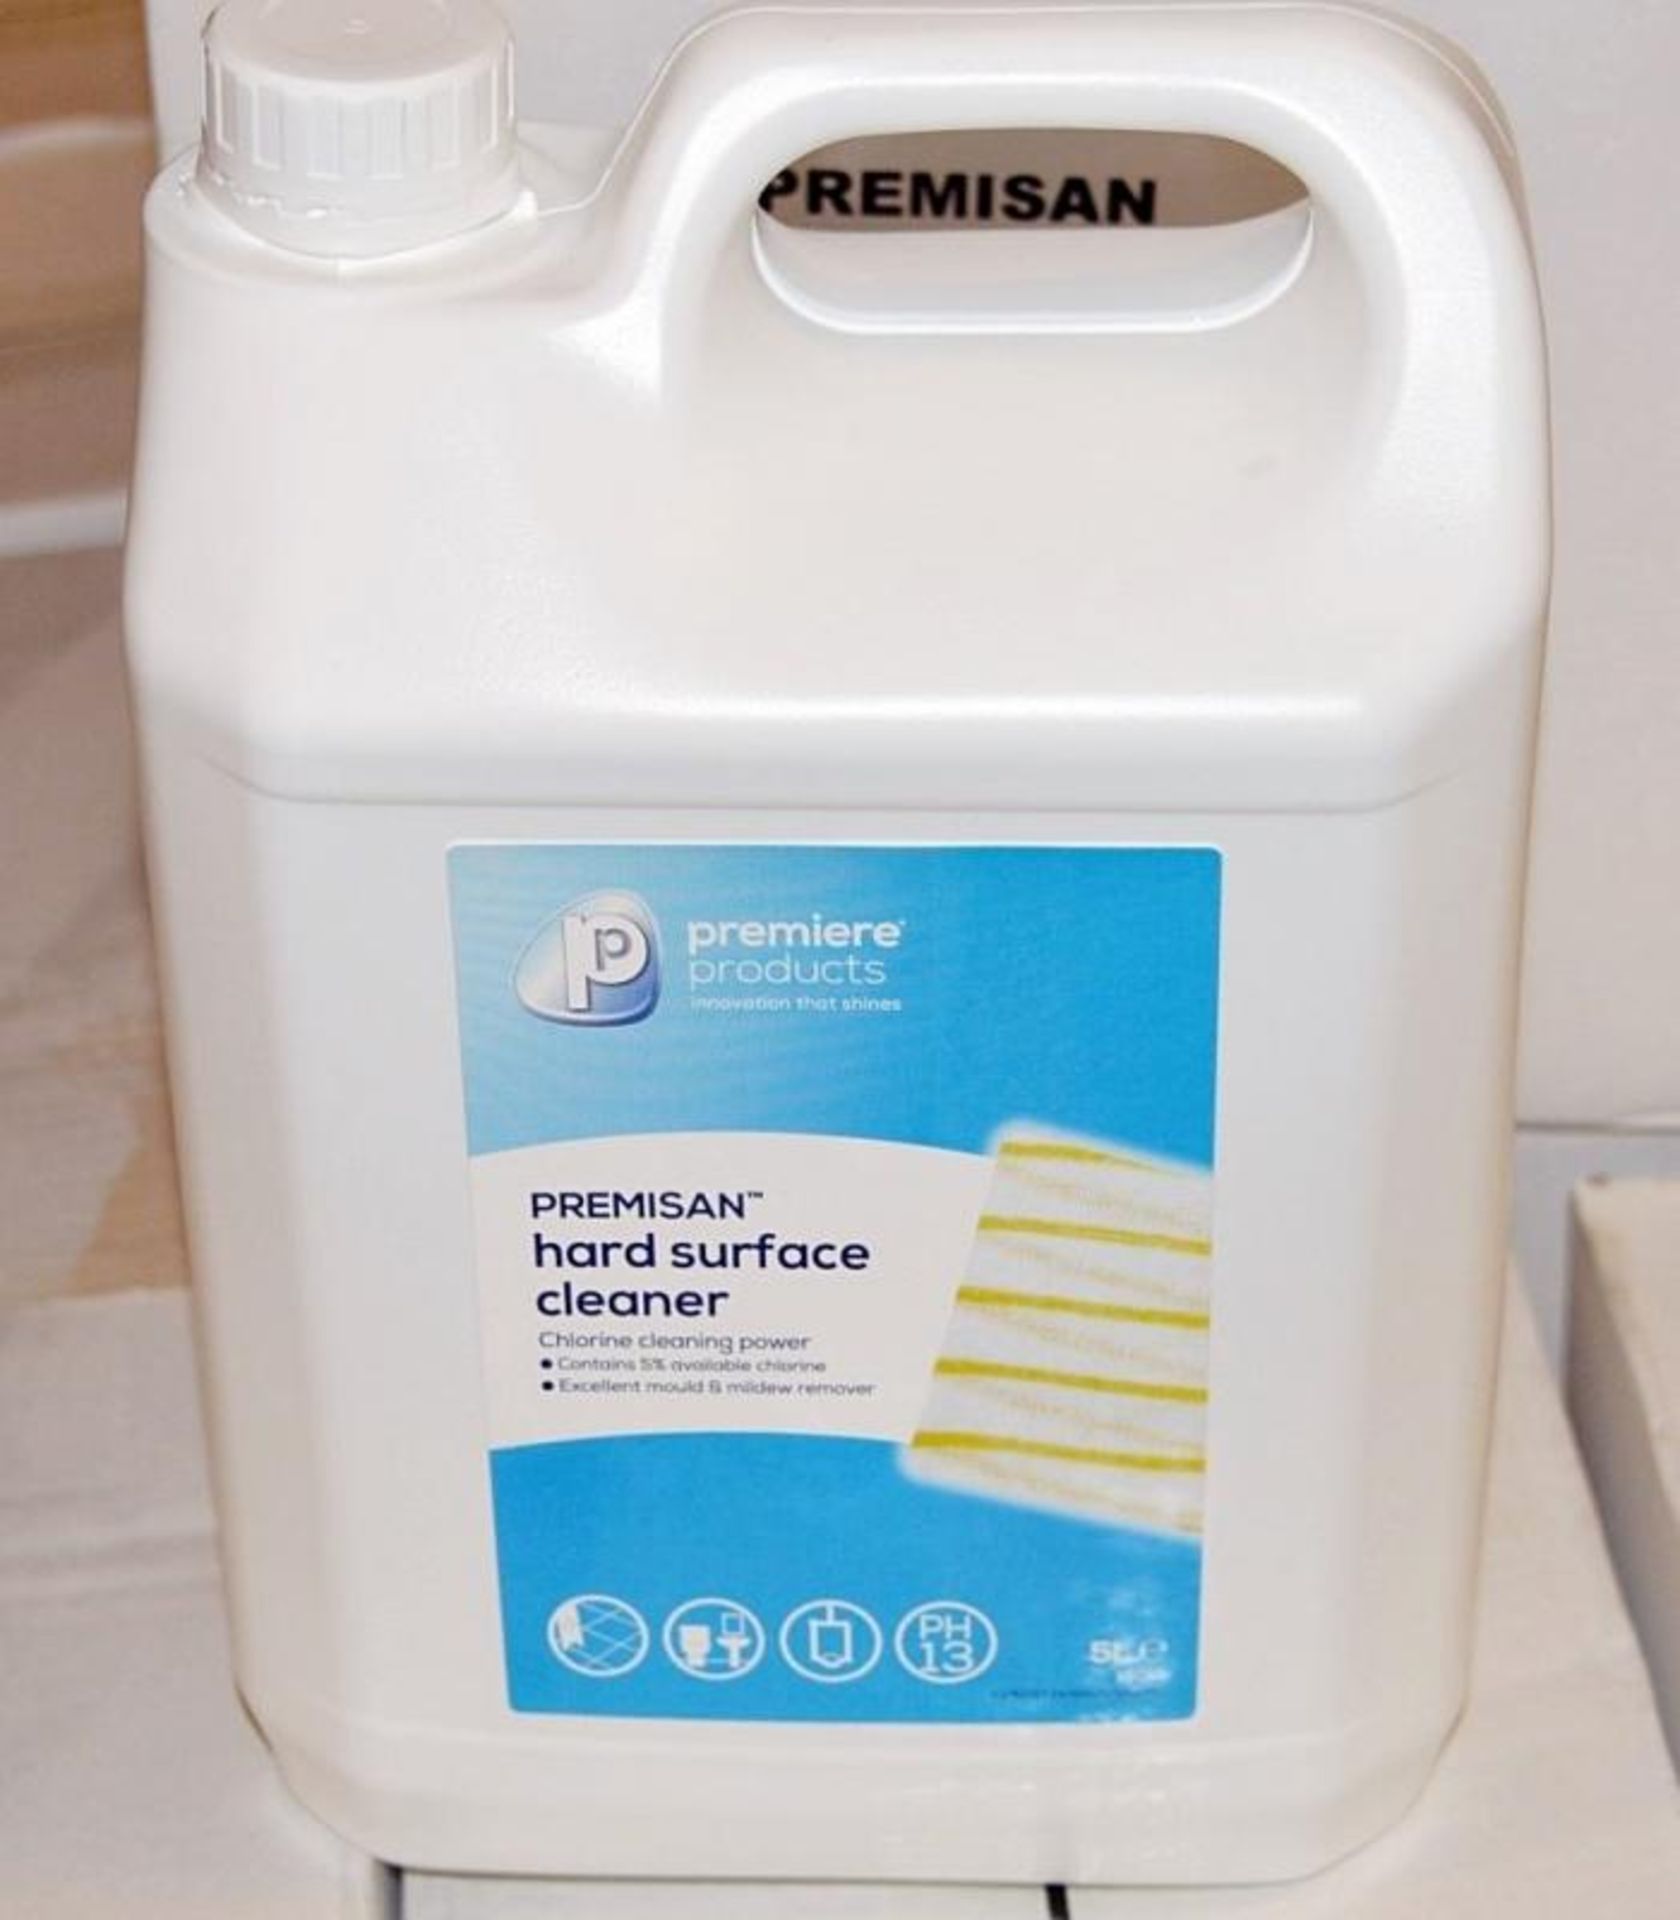 10 x Premiere Products Hard Surface Cleaner - A Professional Mould & Mildew Remover With Chlorine